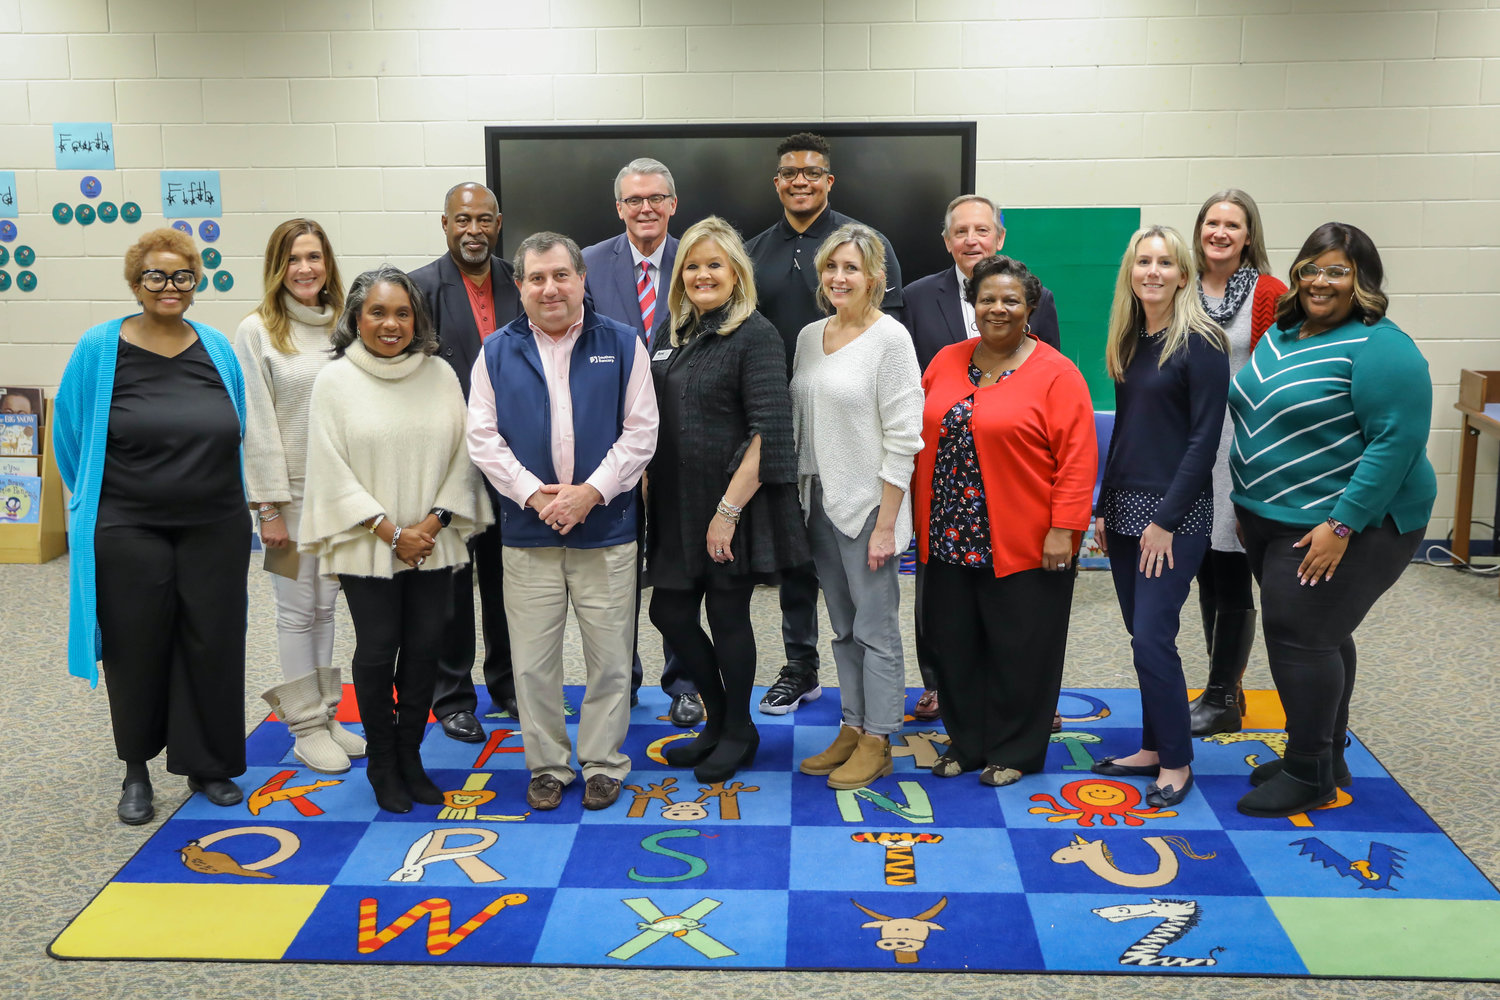 Staff from Camden Elementary and Luther Branson Elementary received $10,000 in gift cards from the Madison County Schools Education Foundation to help teachers drive back and forth to school and deal with gas costs. Pictured, from left: (Front row) Charlotte Seals, Madison County Schools superintendent; Joseph Ricotta, Madison County Community Trust; Gaye Broyles, MCSEF; Sherry Liston, Camden Elementary teacher; Dr. Fannie Green, Camden Elementary principal; Shonda Pummel, Camden Elementary teacher; Zoe Kenney, Camden Elementary teacher. (Back row) Deborah Griffin, Camden Elementary teacher; Alecia Persac, Camden Elementary teacher; Tim Pickett, MCSEF; Phil Buffington, Madison County Community Trust; Chamar McDonald, MCSEF; Cecil Harper, Madison County Community Trust; and Sissy Lynn, MCSEF.